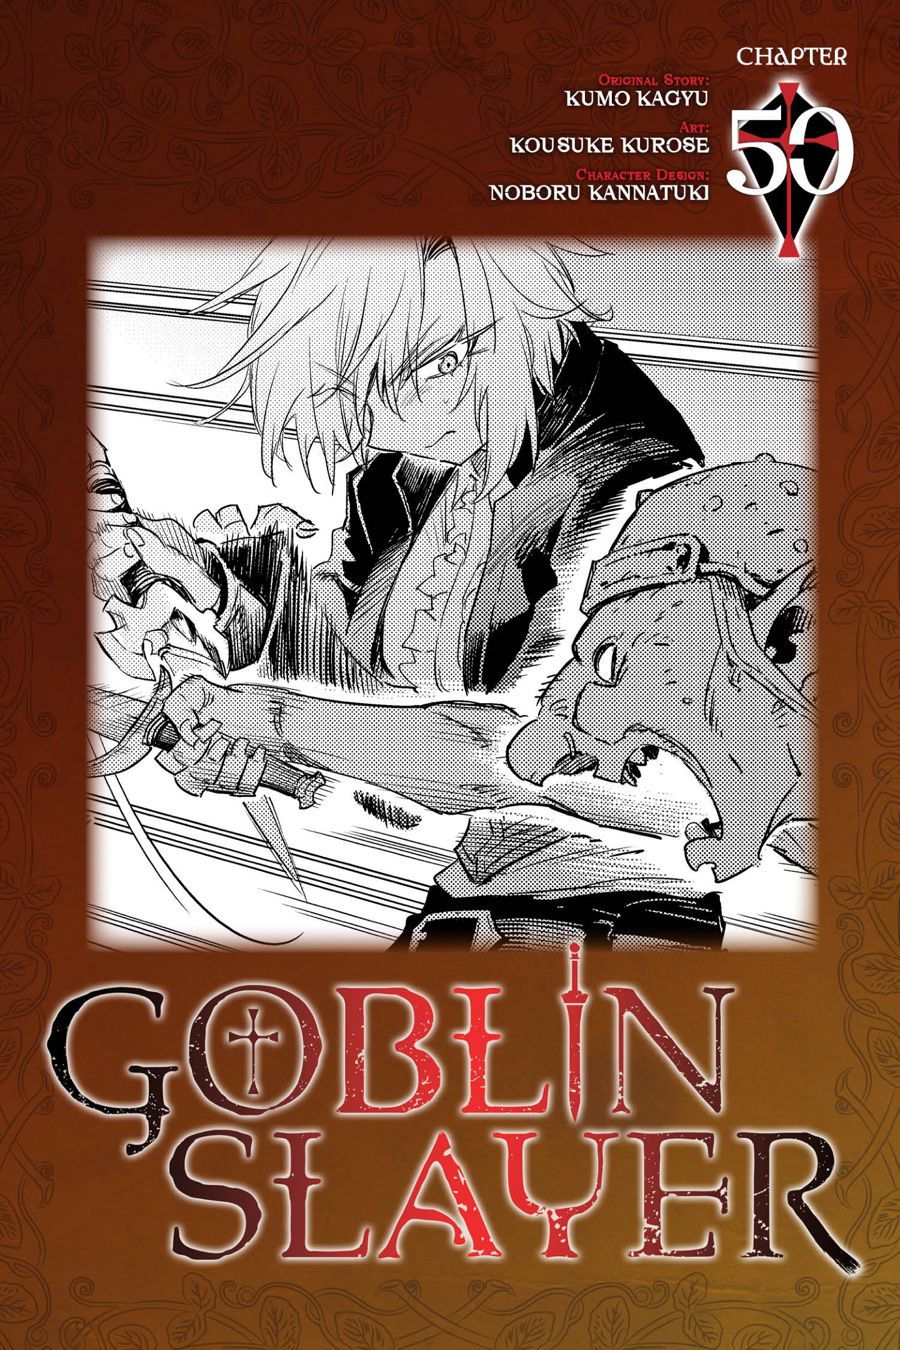 Goblin Slayer chapter 50 page 1